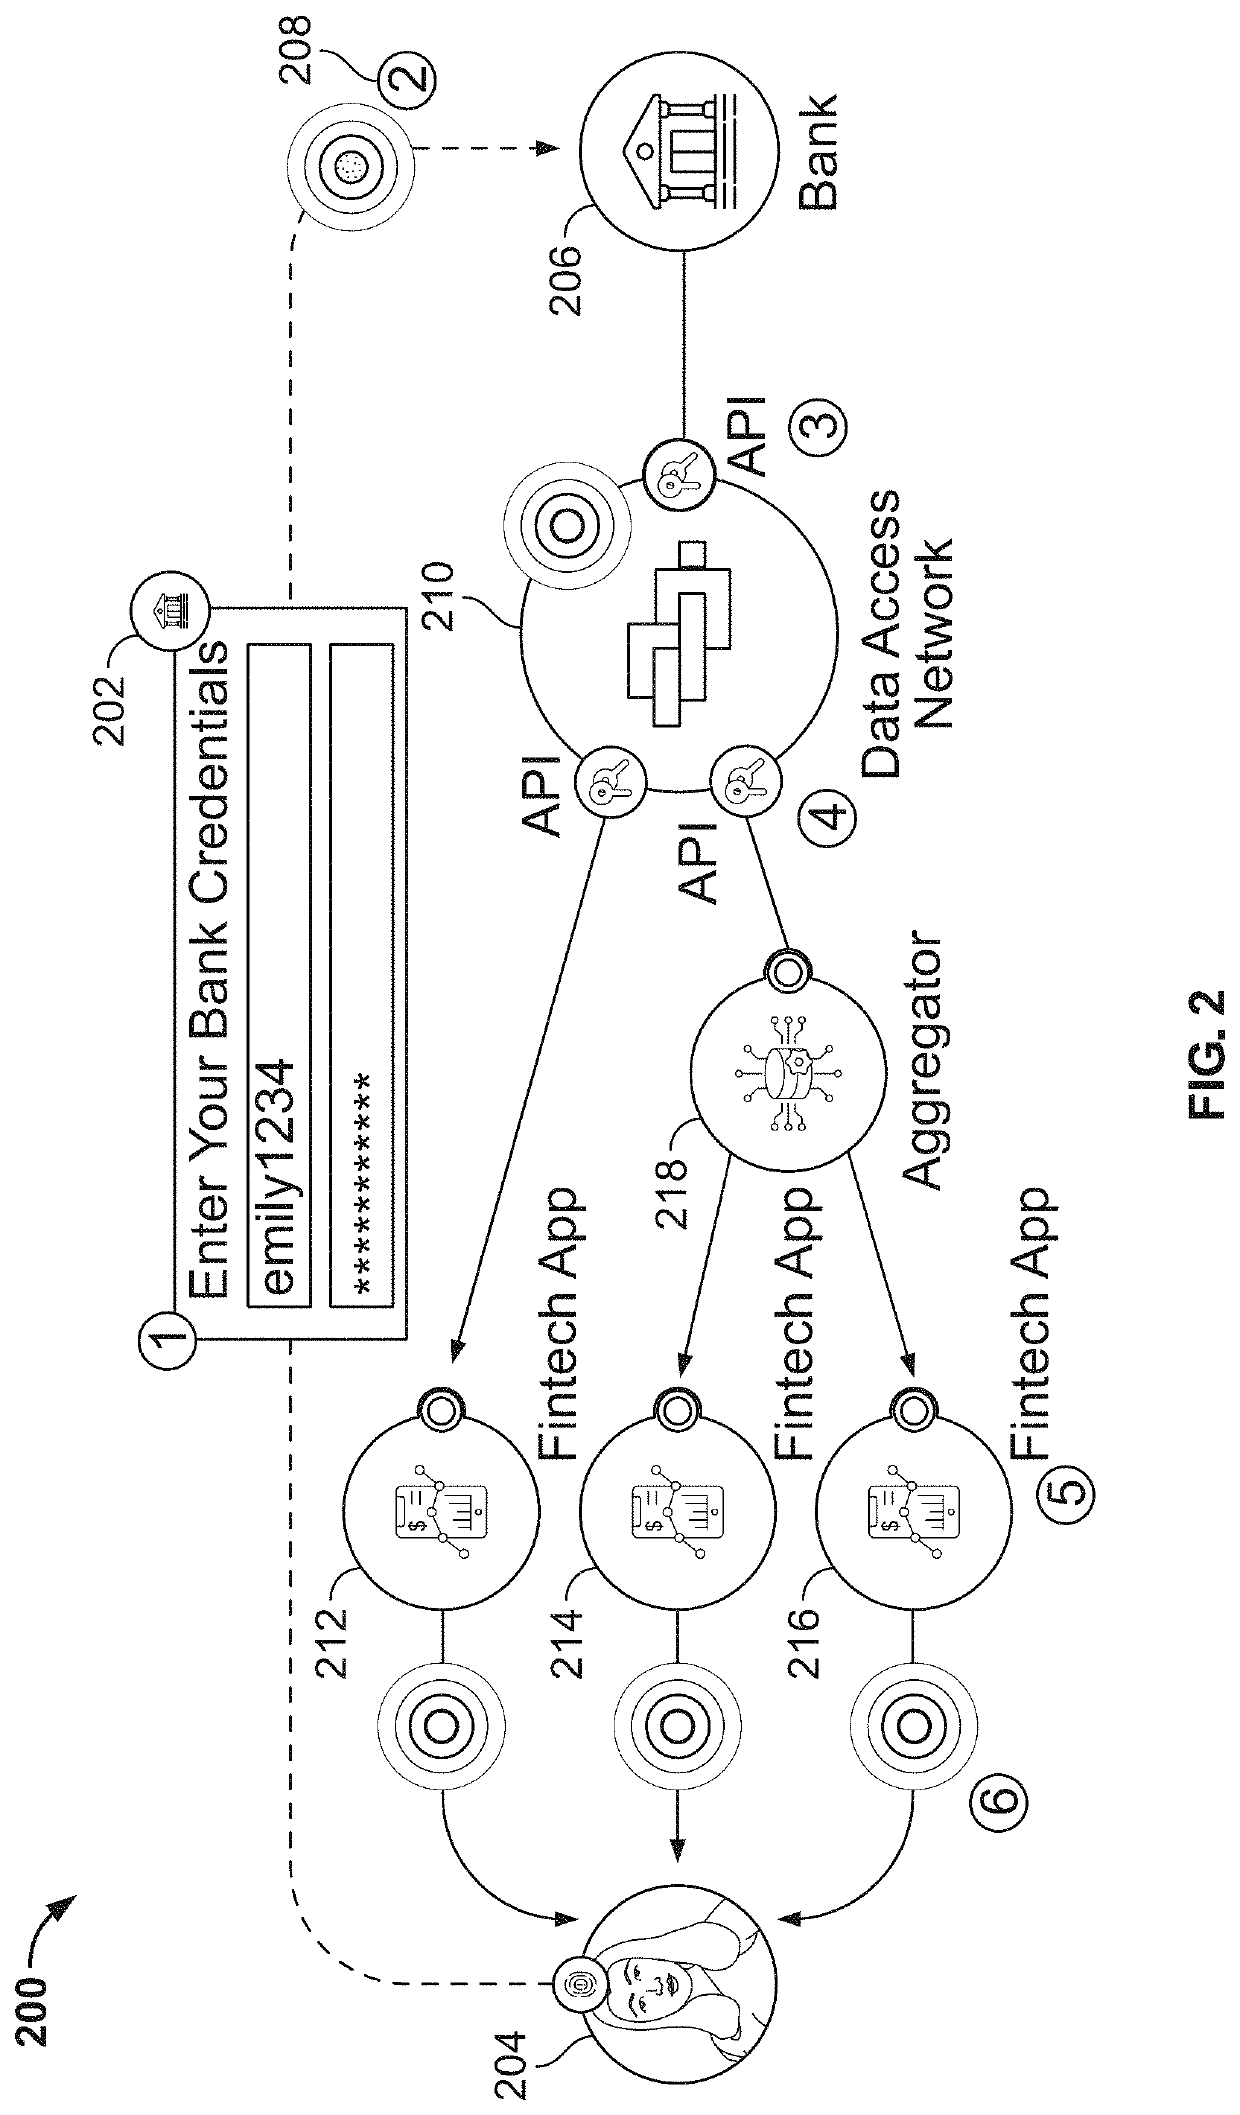 Systems and methods for managing tokens and filtering data to control data access